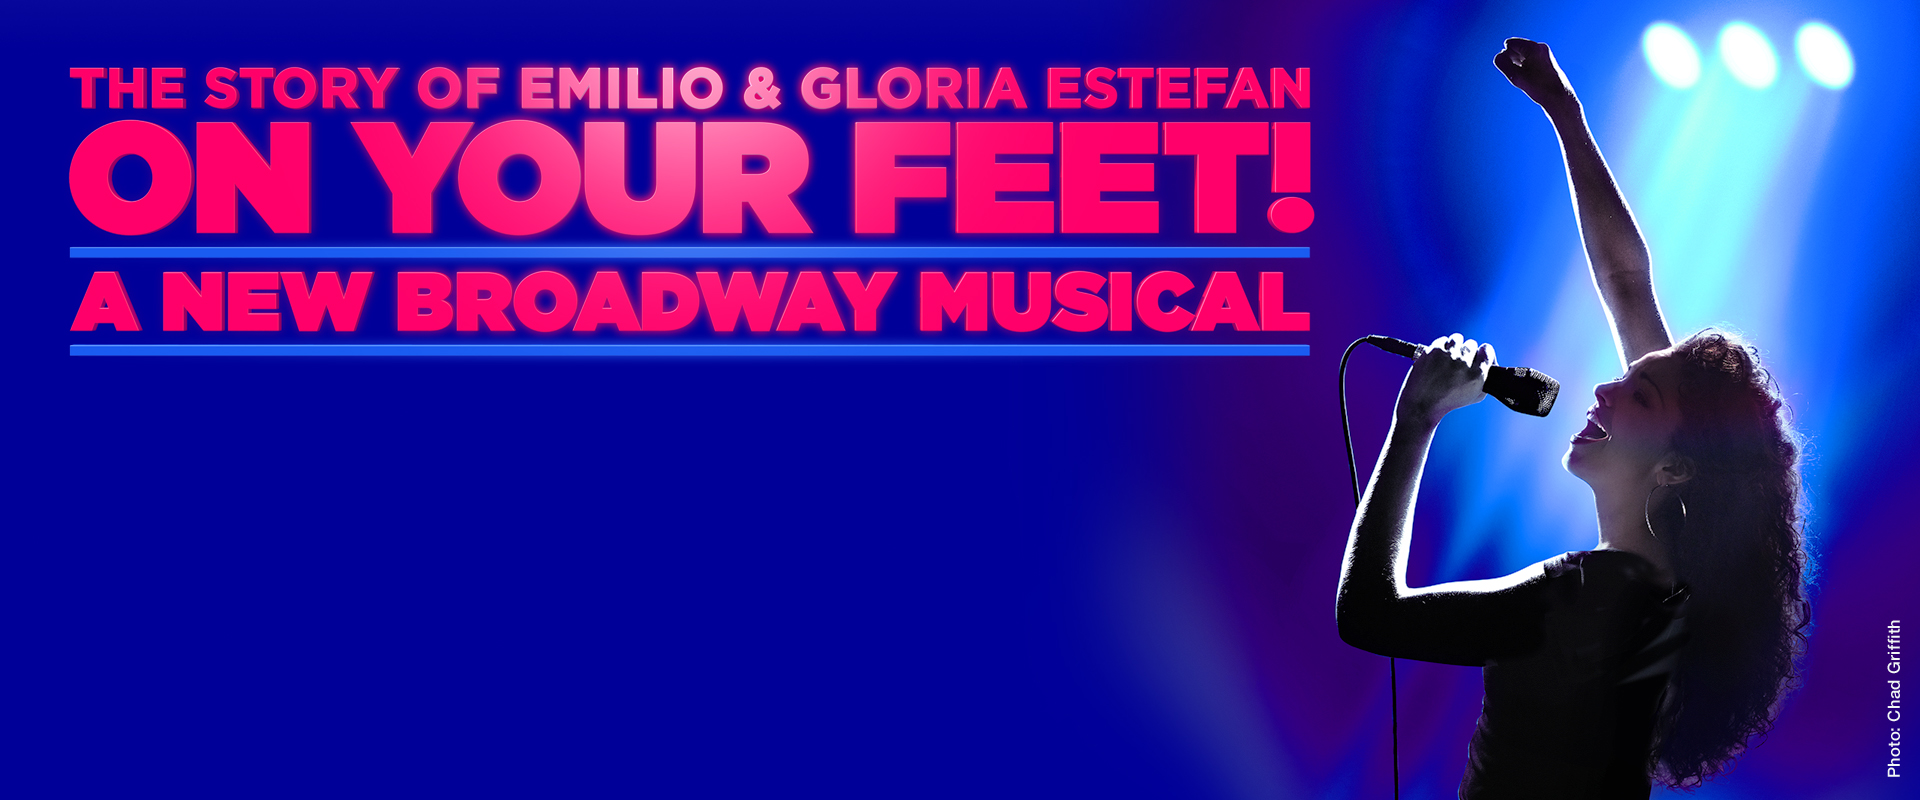 On Your Feet image